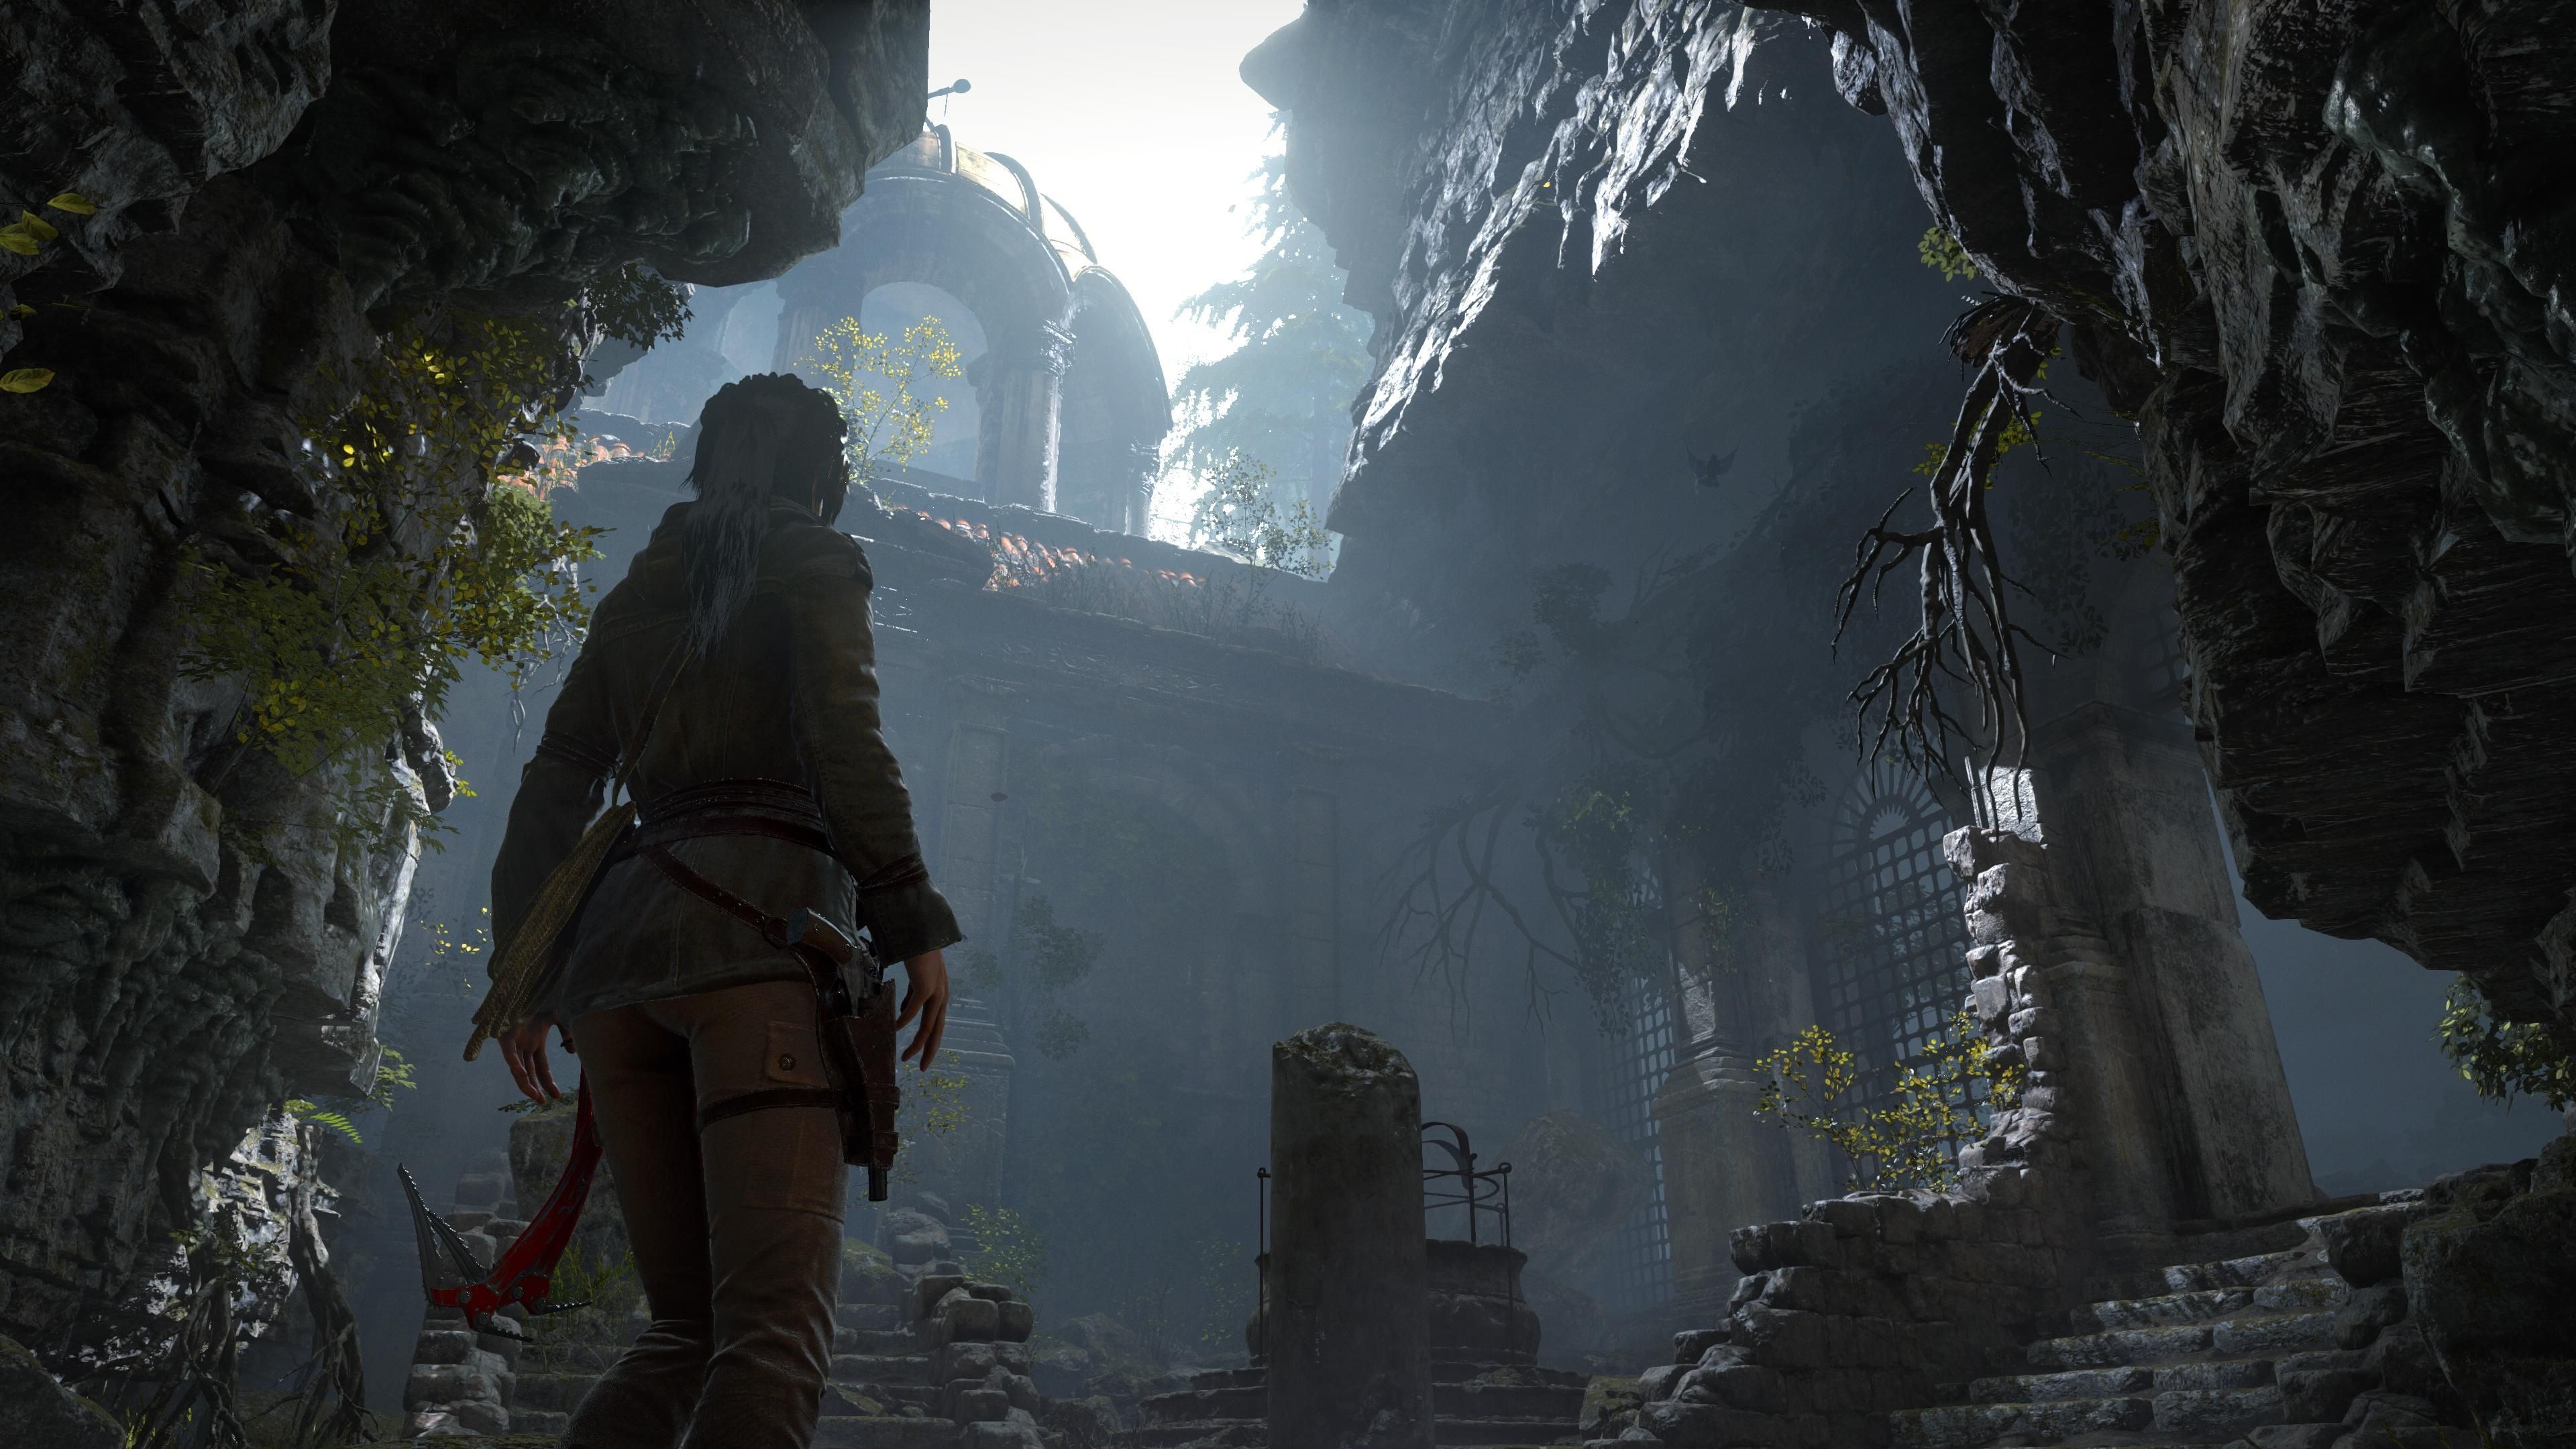 New Tomb Raider, Rise of the Tomb Raider, Epic gaming moments, 3840x2160 4K Desktop